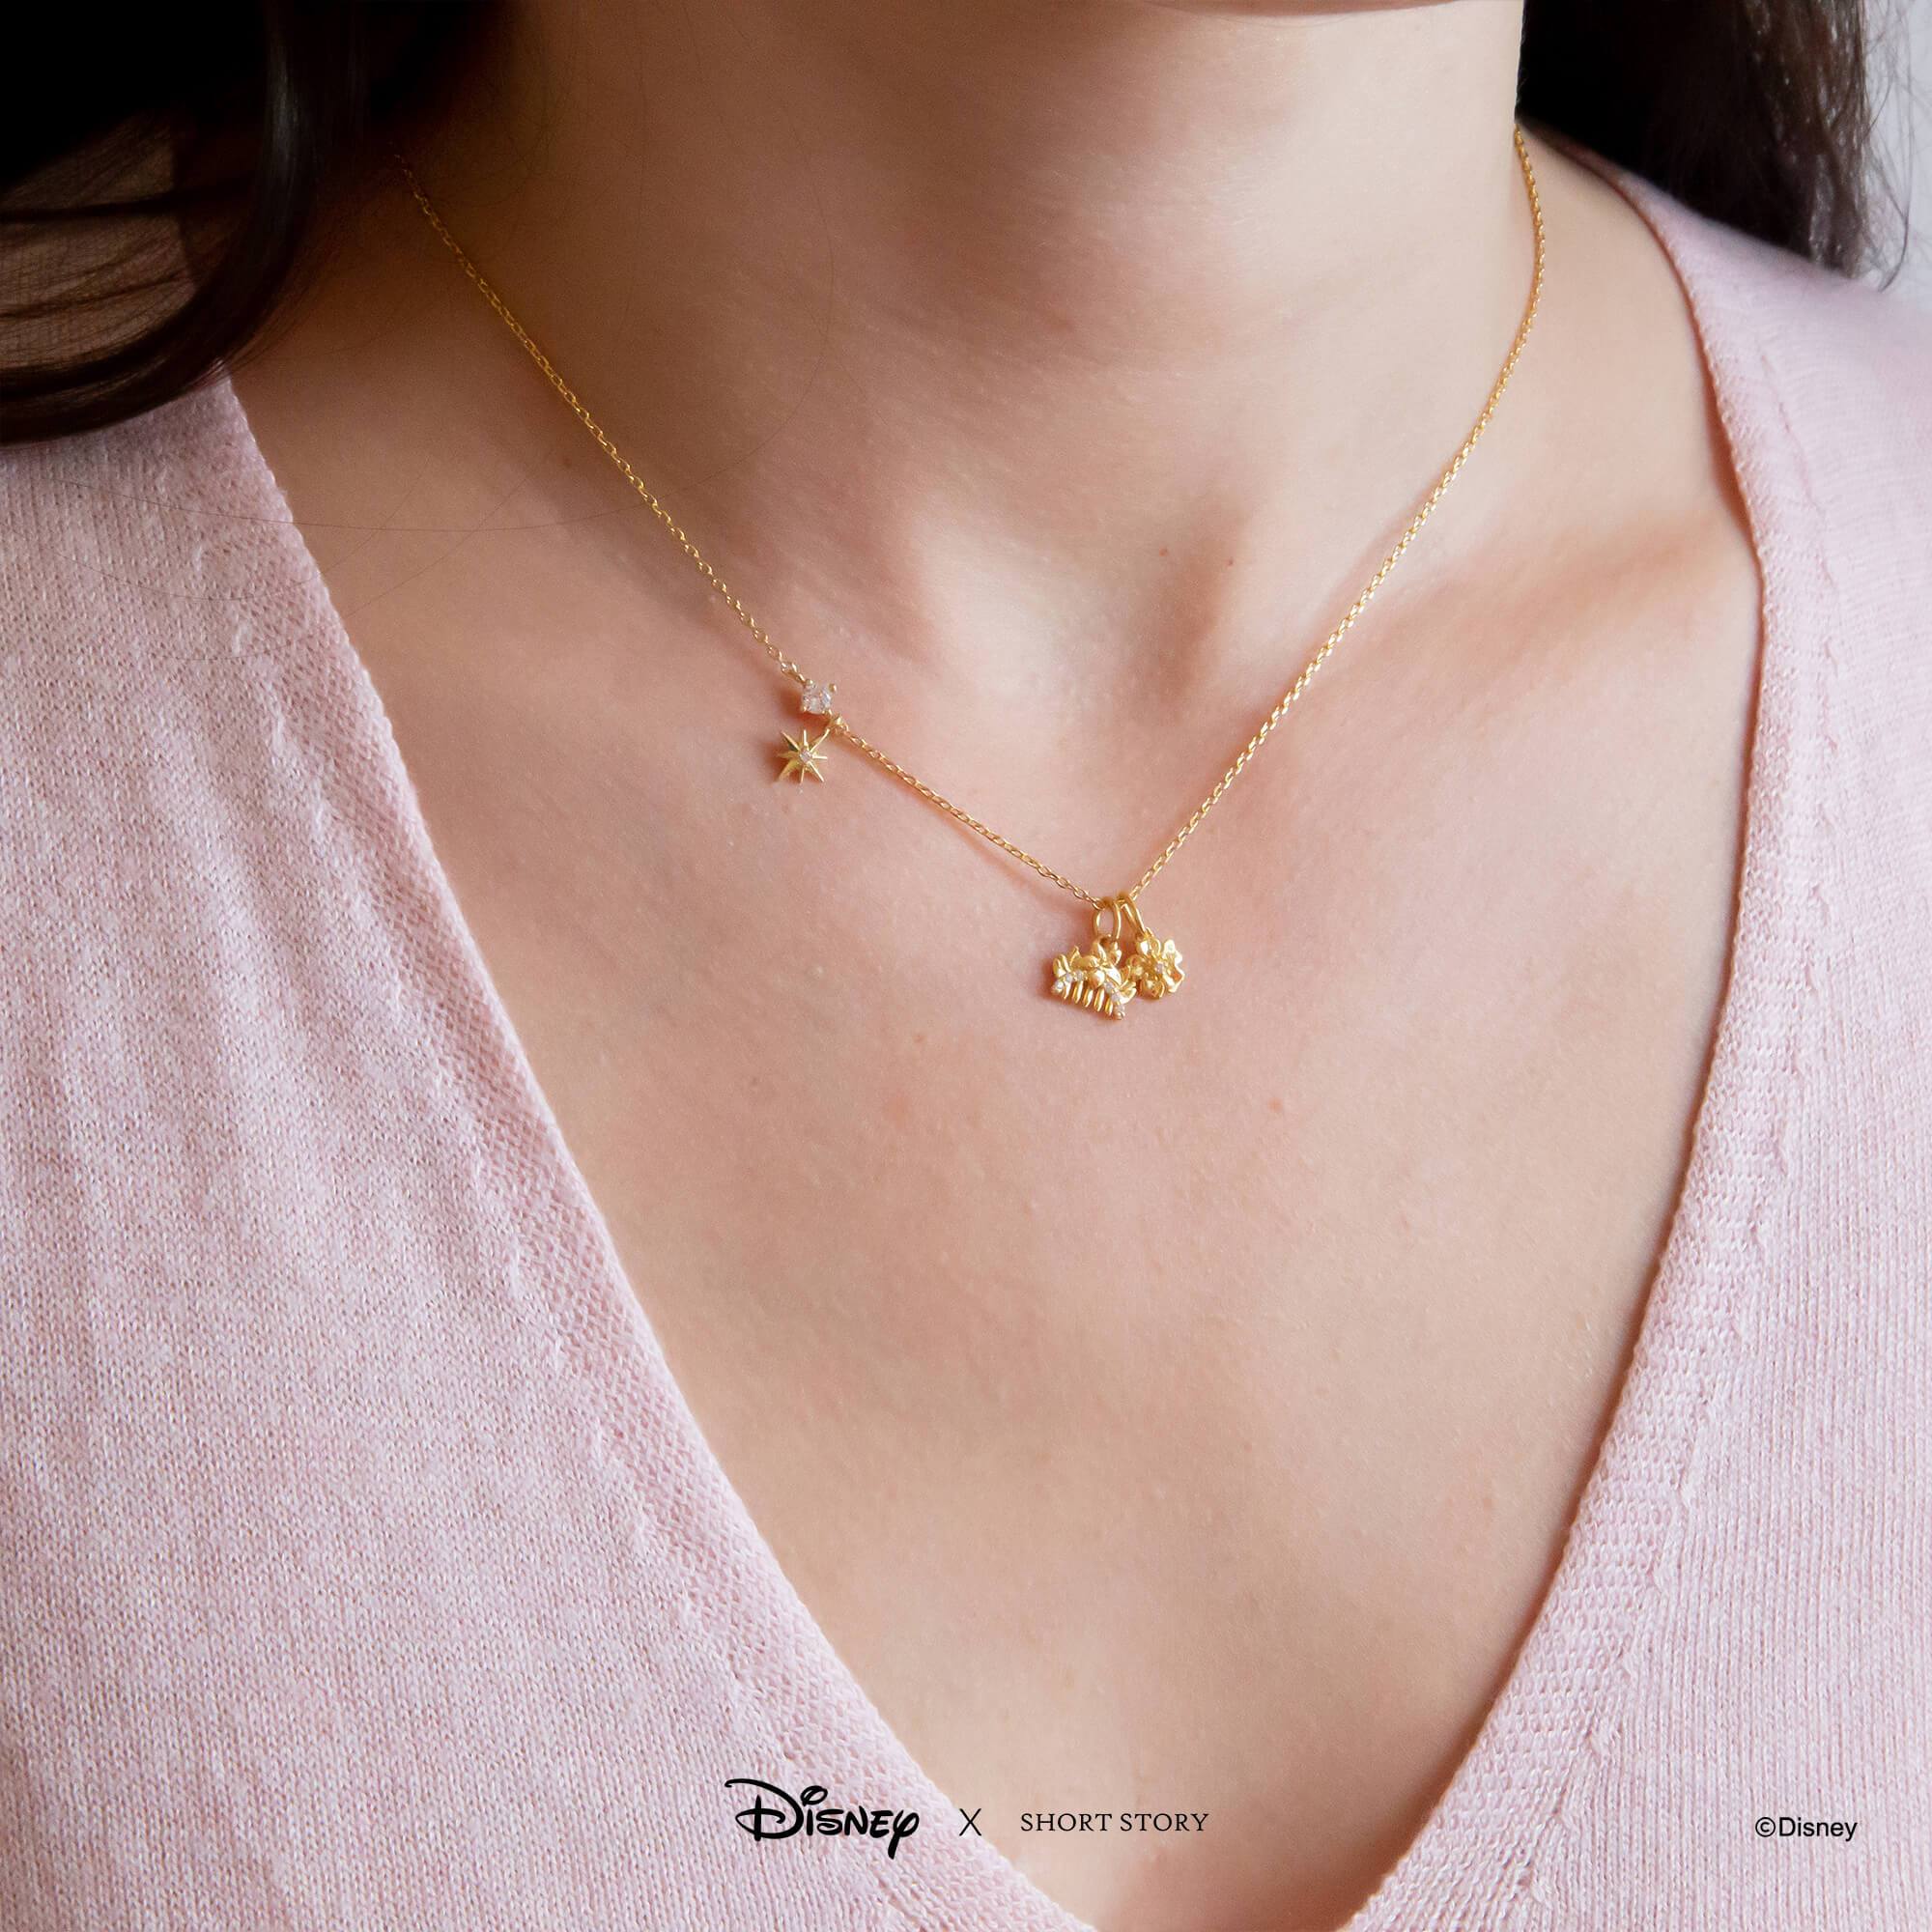 Mulan Chinese Fairy Tale Necklace Asian Dragon by random-wish on DeviantArt